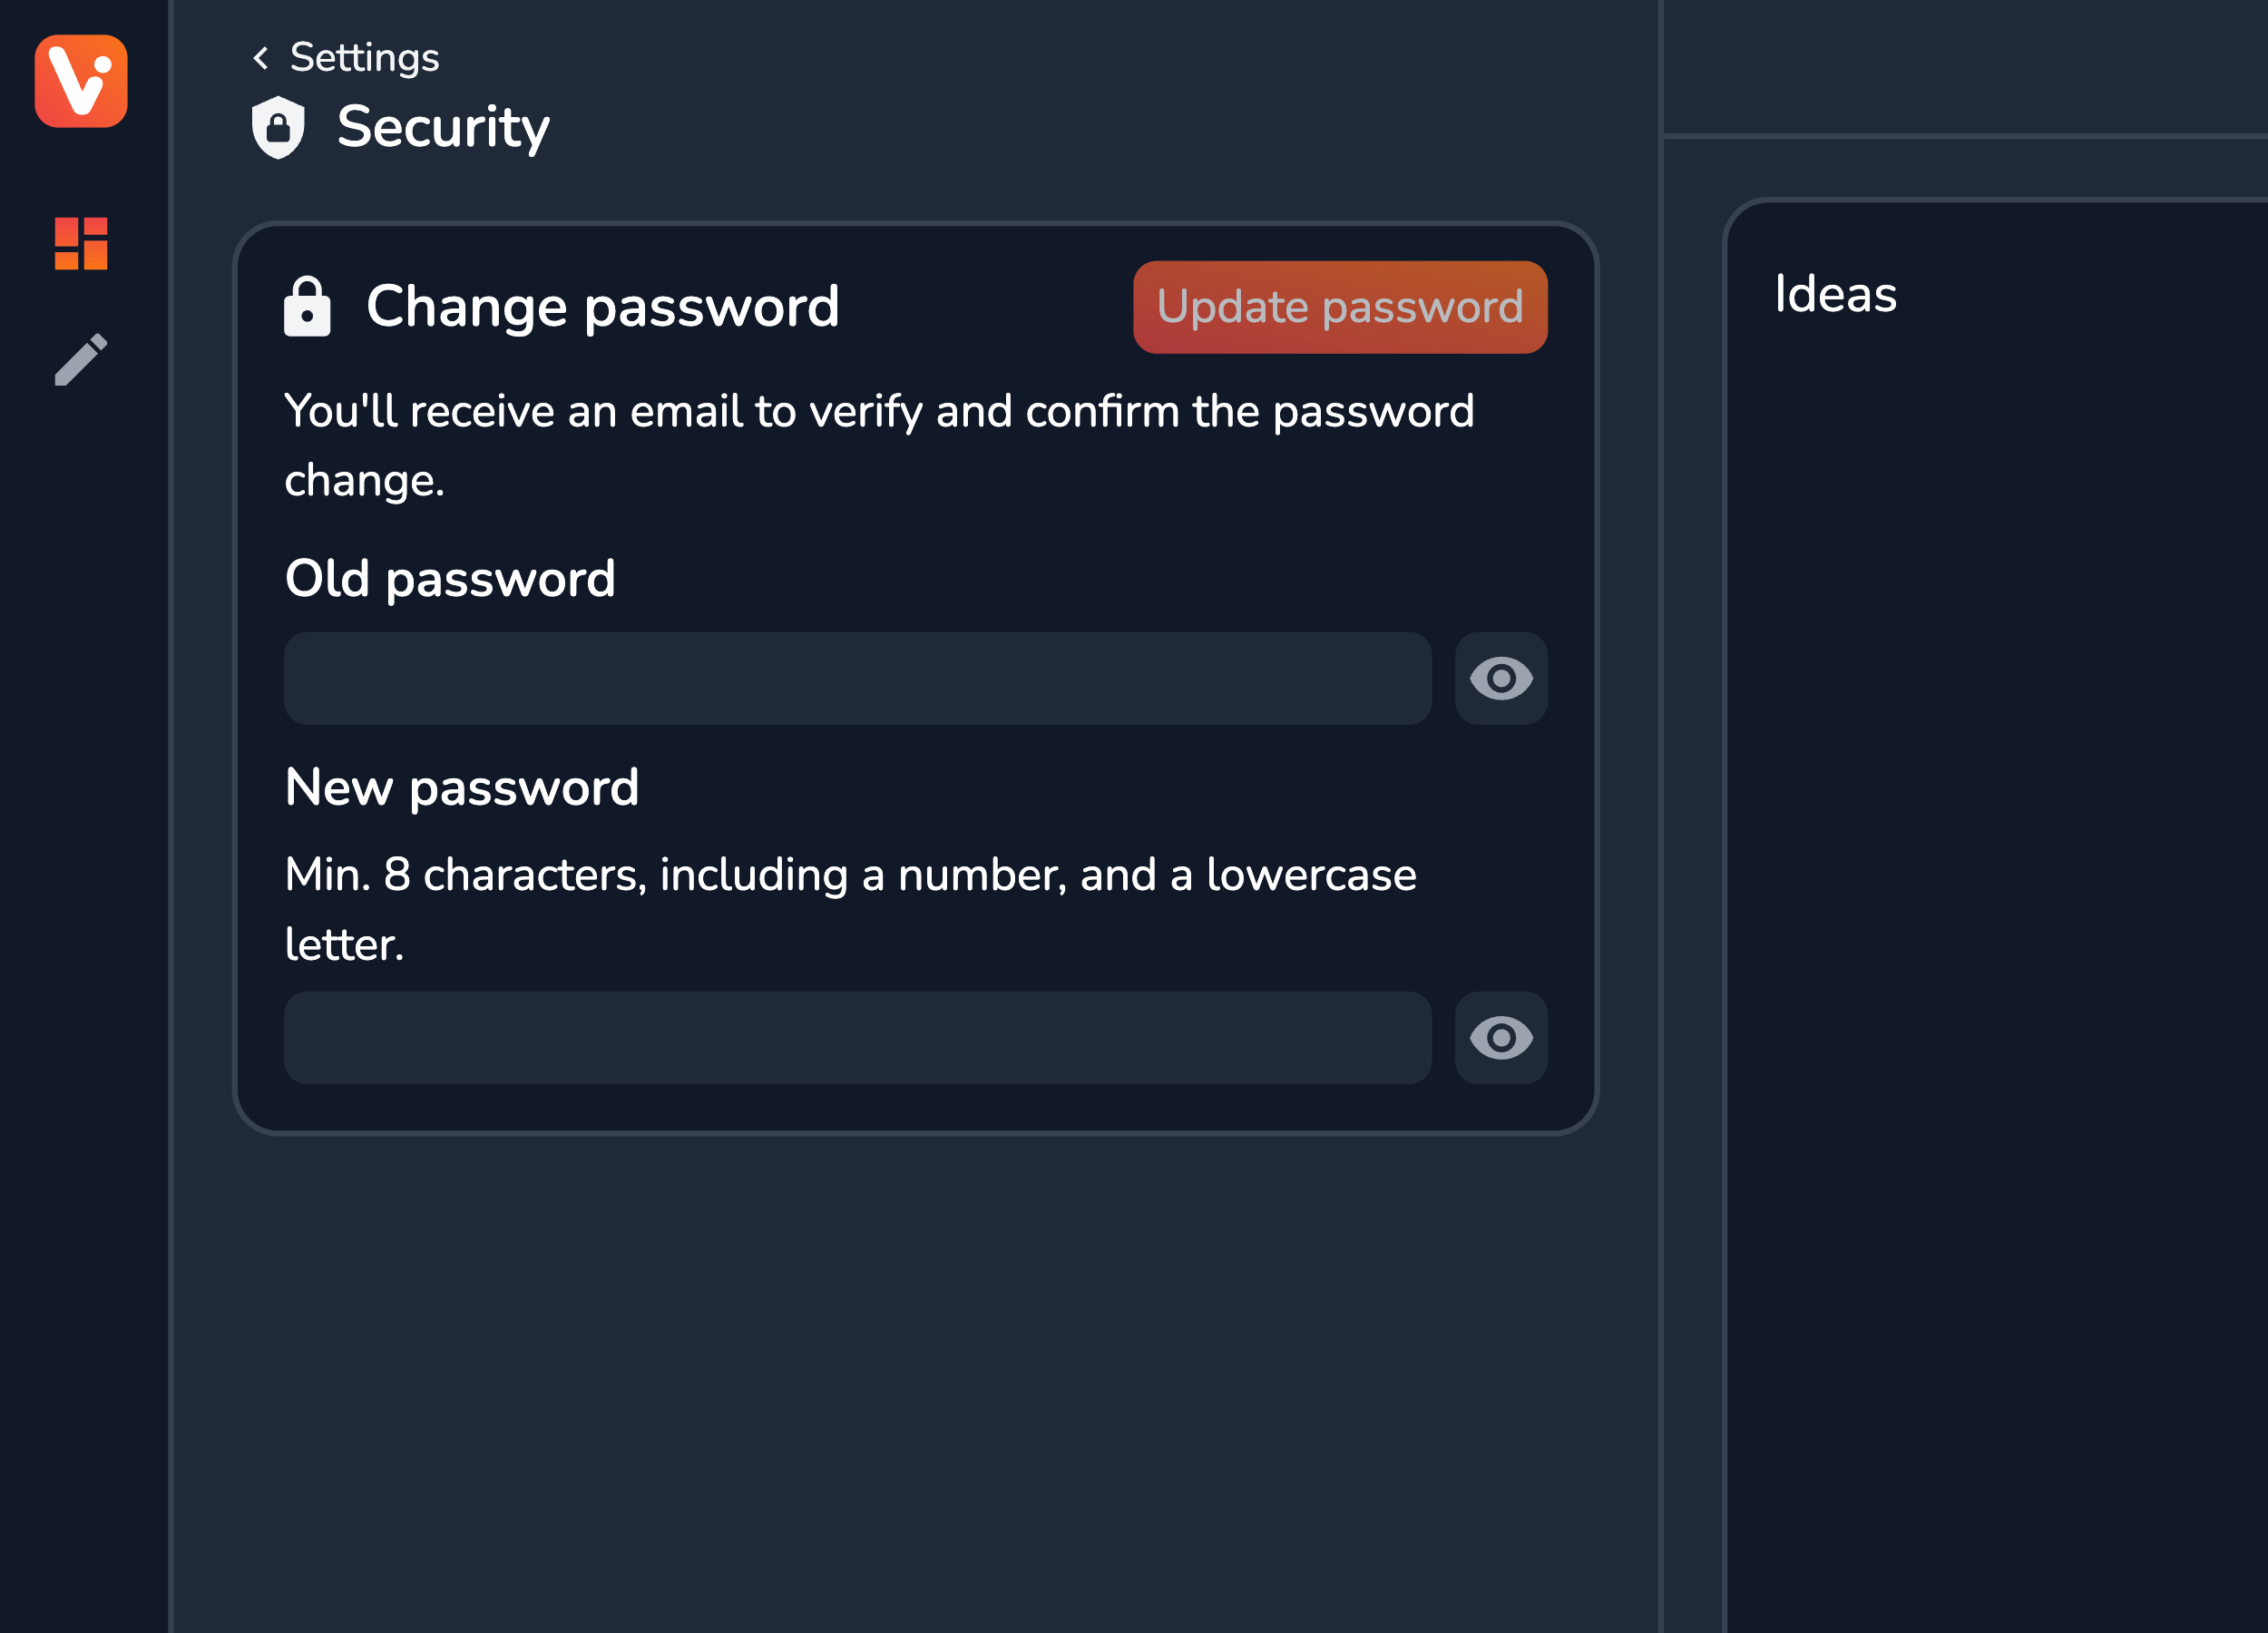 The Security settings